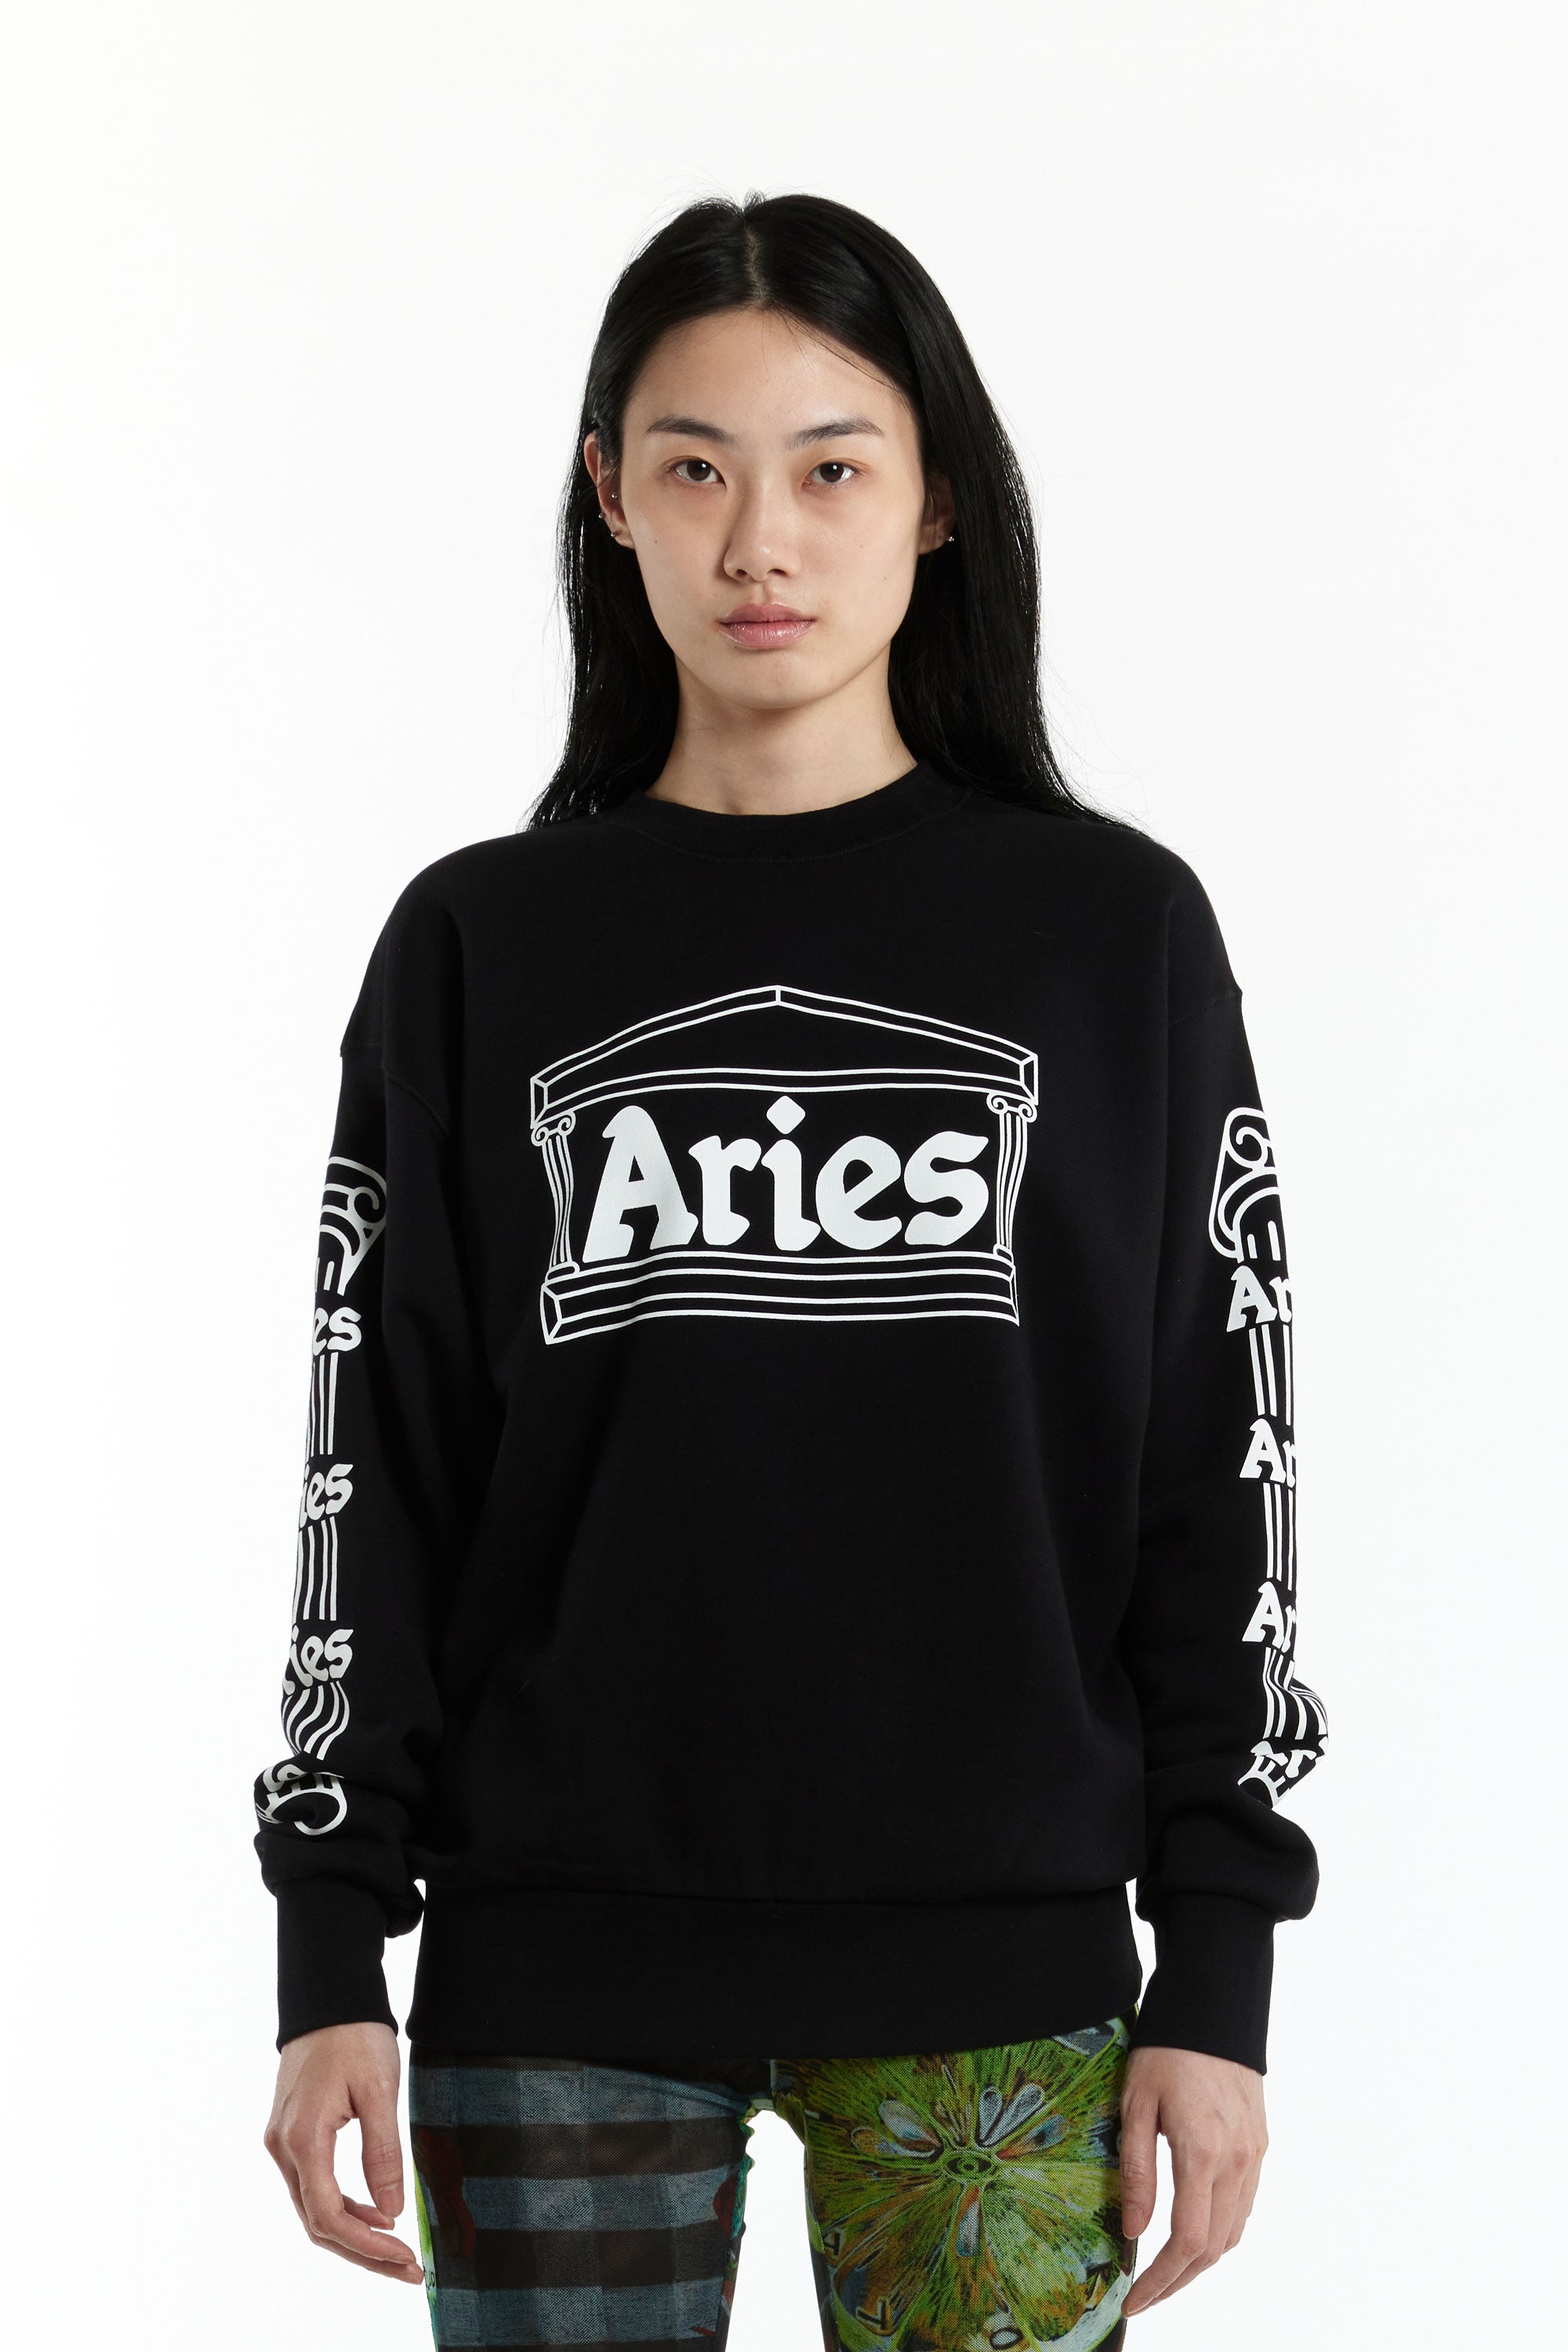 Aries Clothing  Shop Aries Clothing Online At Perks & Mini